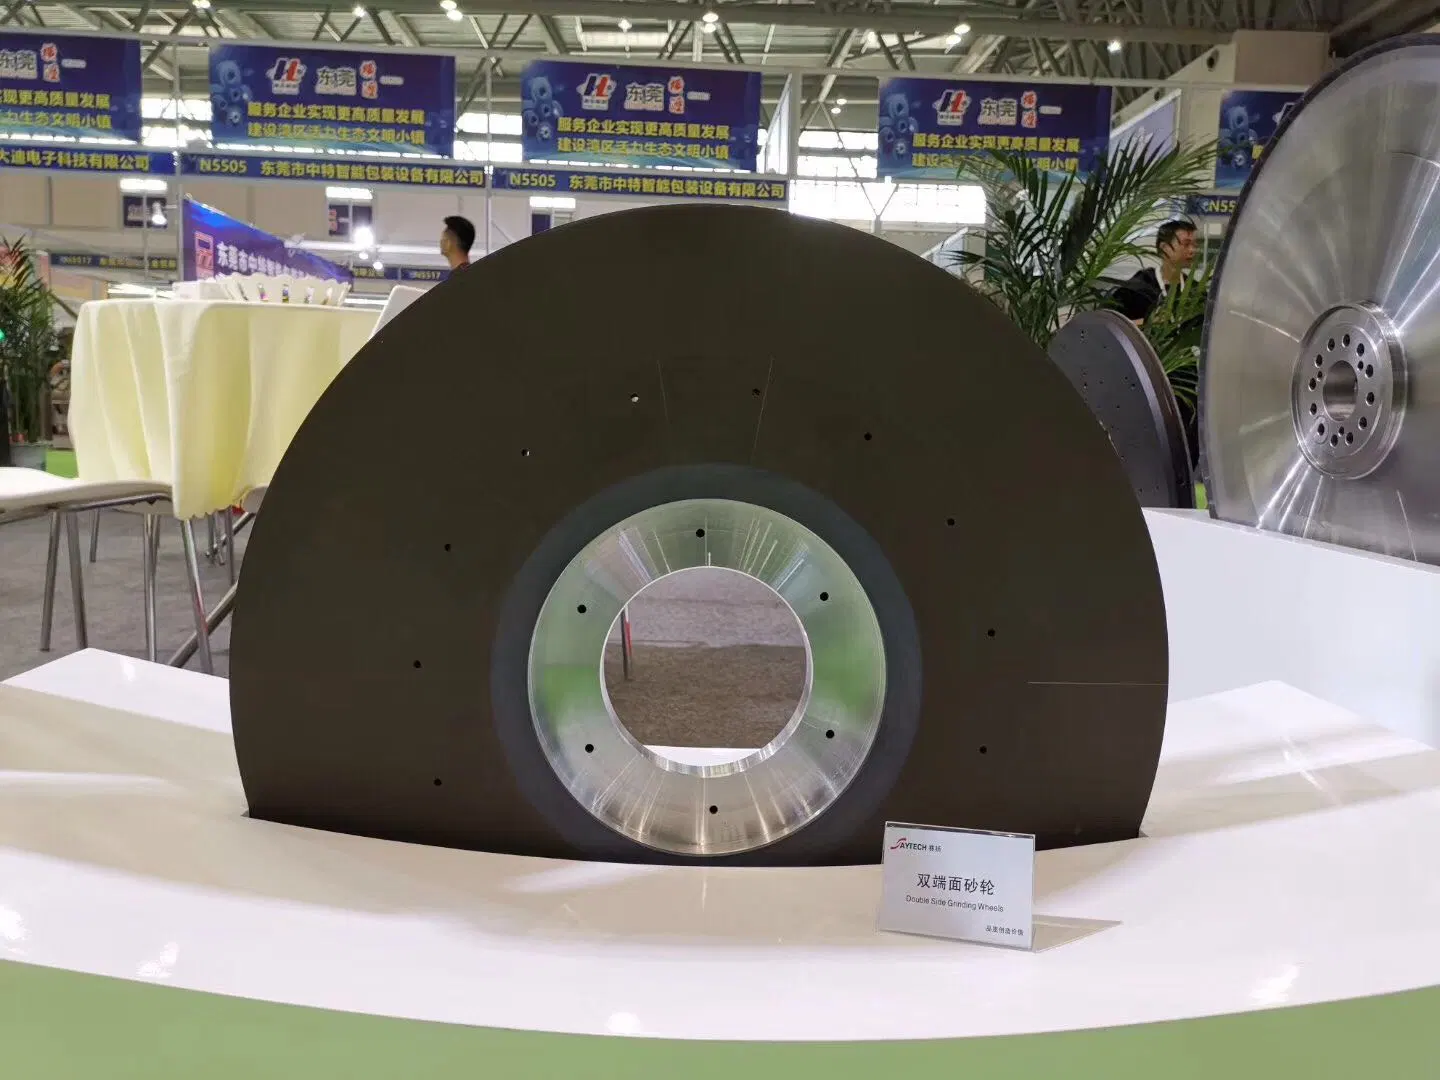 Vitrified Bond CBN Grinding Wheels, Superabrasives Diamond Wheels, Indexable Inserts in Tungsten Carbide, PCD (polycrystalline diamond) and PCBN